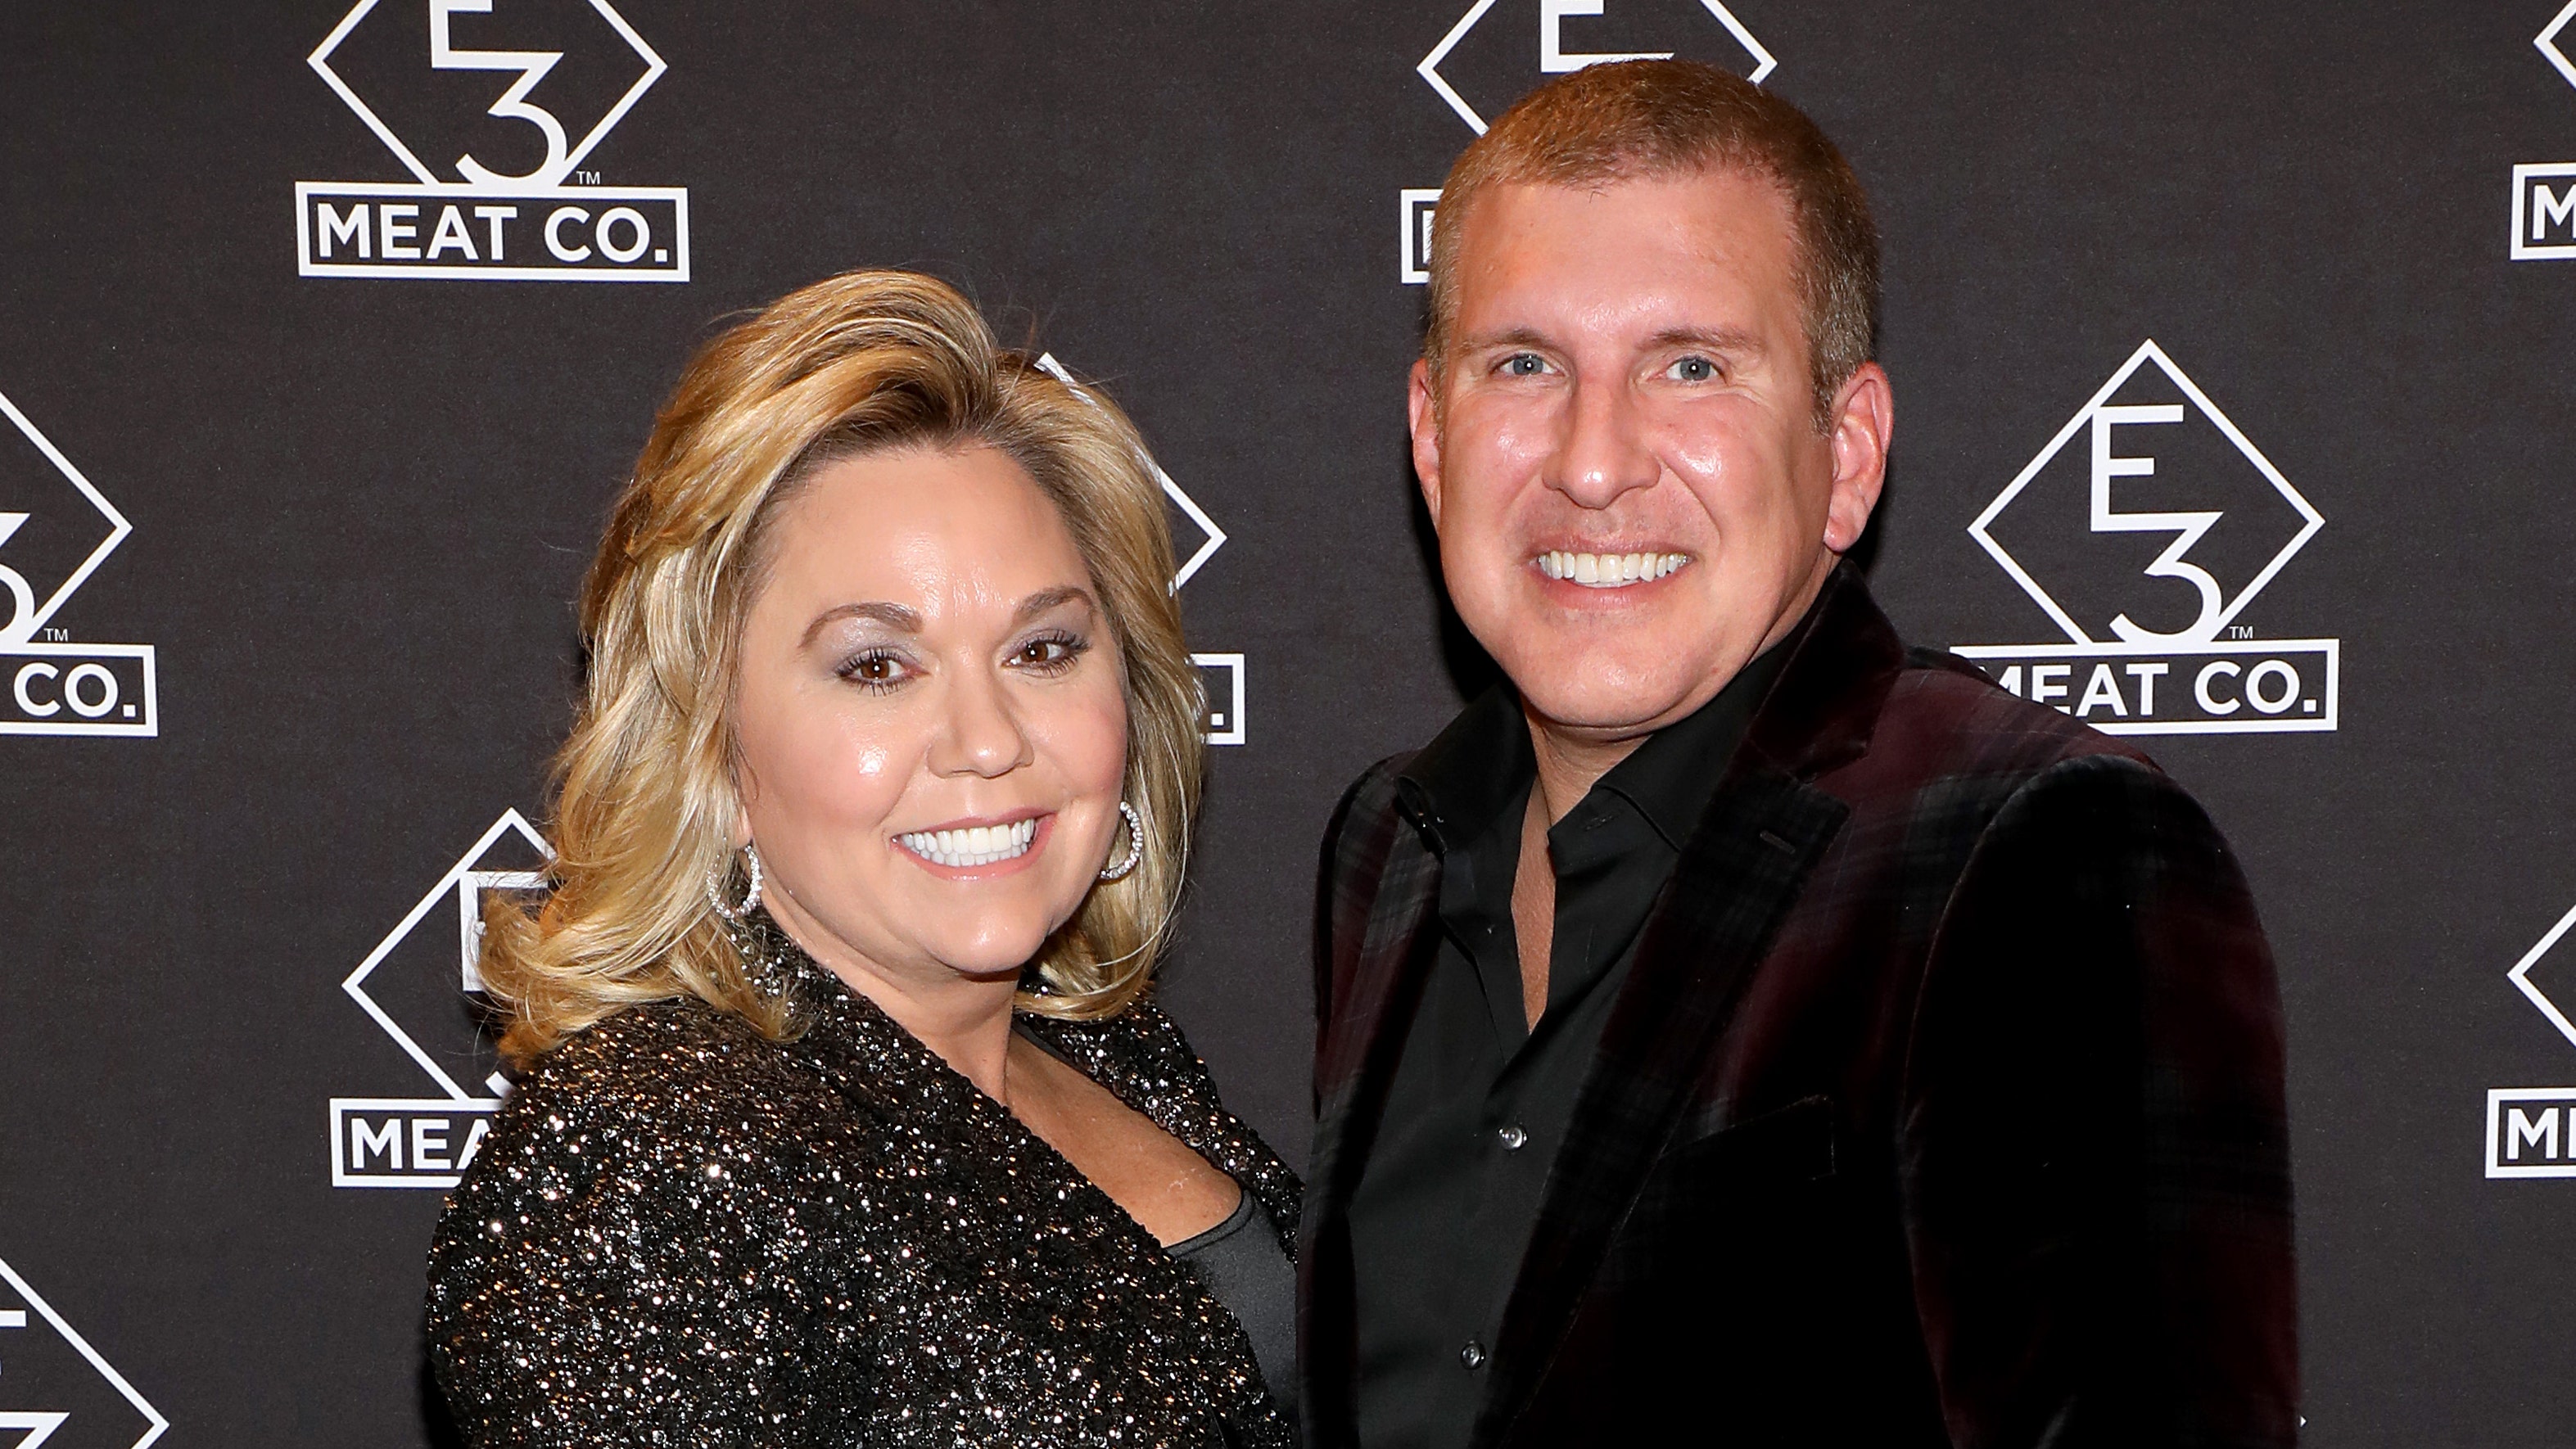 Todd Chrisley speaks out after being ‘unfairly targeted’ in tax evasion case: ‘So blessed and grateful’